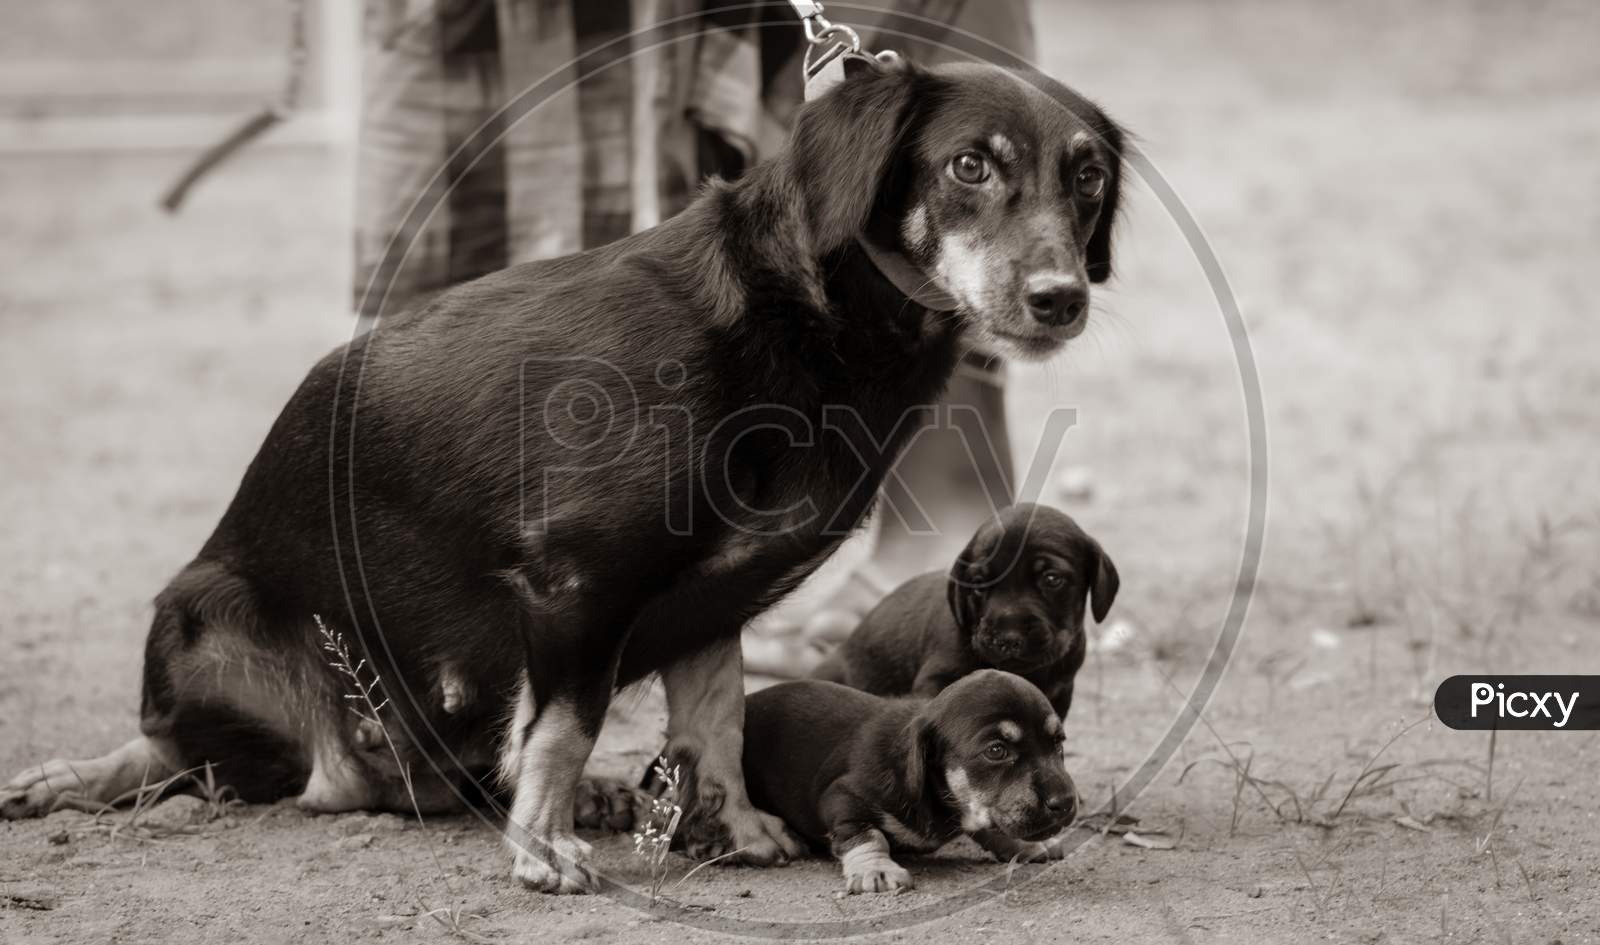 Dachshund Dog Family Photograph, Innocent Mother And Her Cute Infant Baby Pups Looking At The Cameraman, Master Standing Close To Them Holding The Leash Just In Case, Black And White Tone Image.